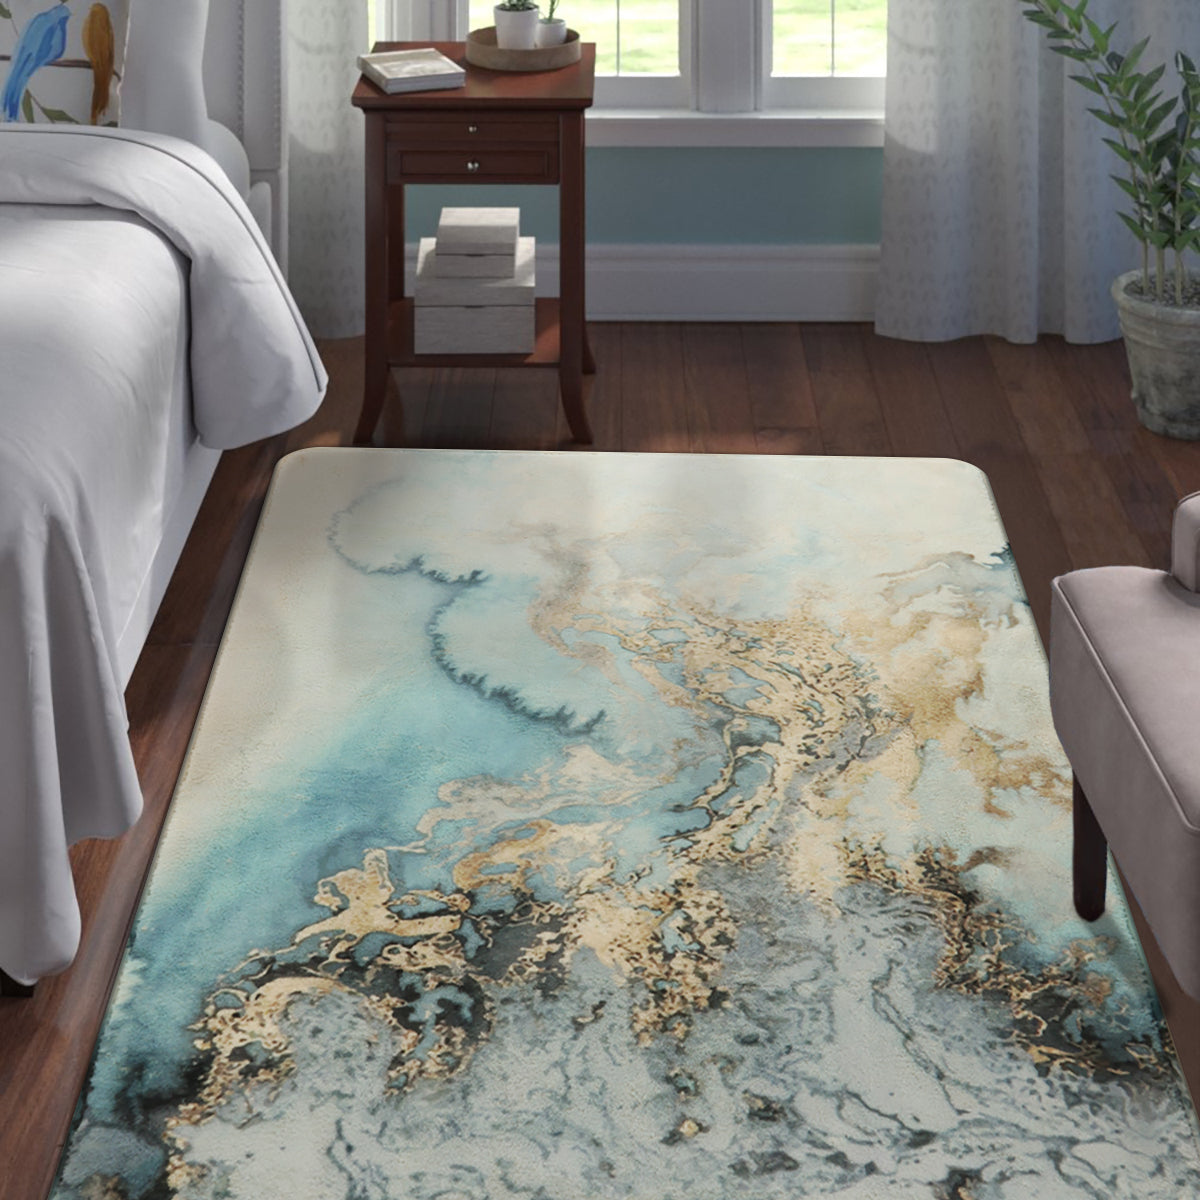 Lahome Ocean Wave Area Rug